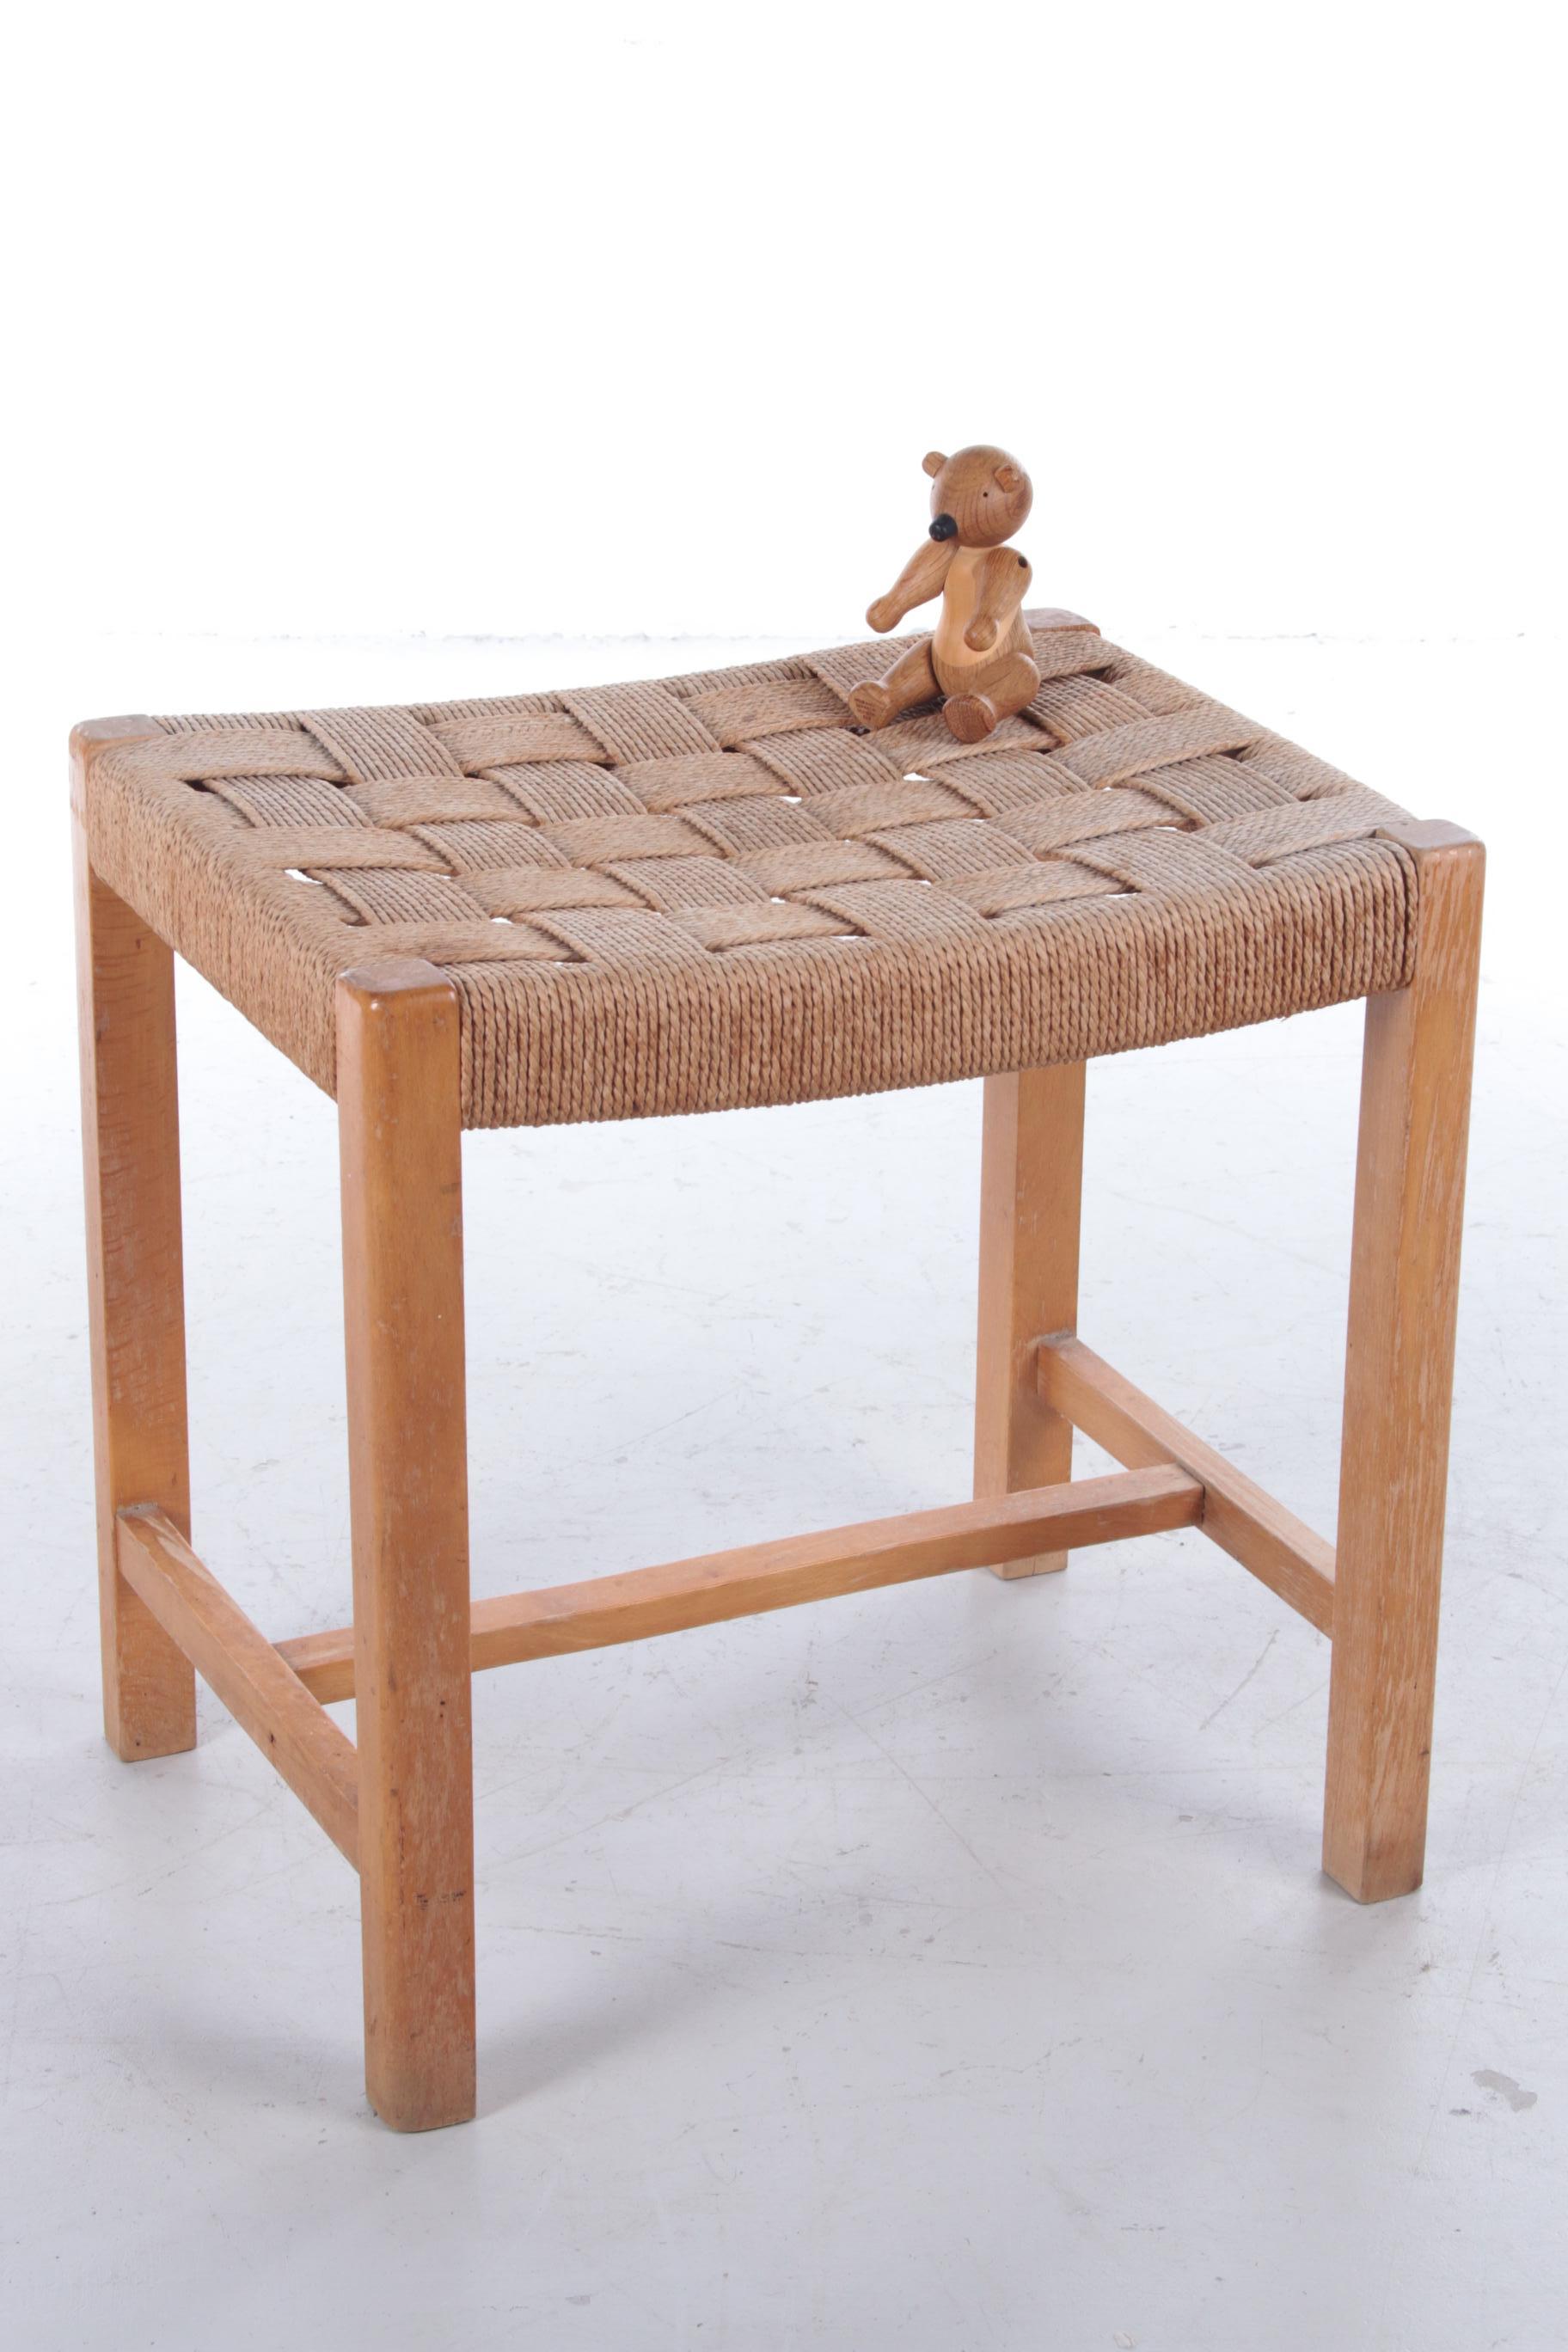 This is a beautiful vintage stool from Denmark, produced in the 1960s.

The frame is made of sturdy teak and the seat is made of woven sea grass. This is slightly thinner than cane and gives the stool a subtle and simple look.

This handmade